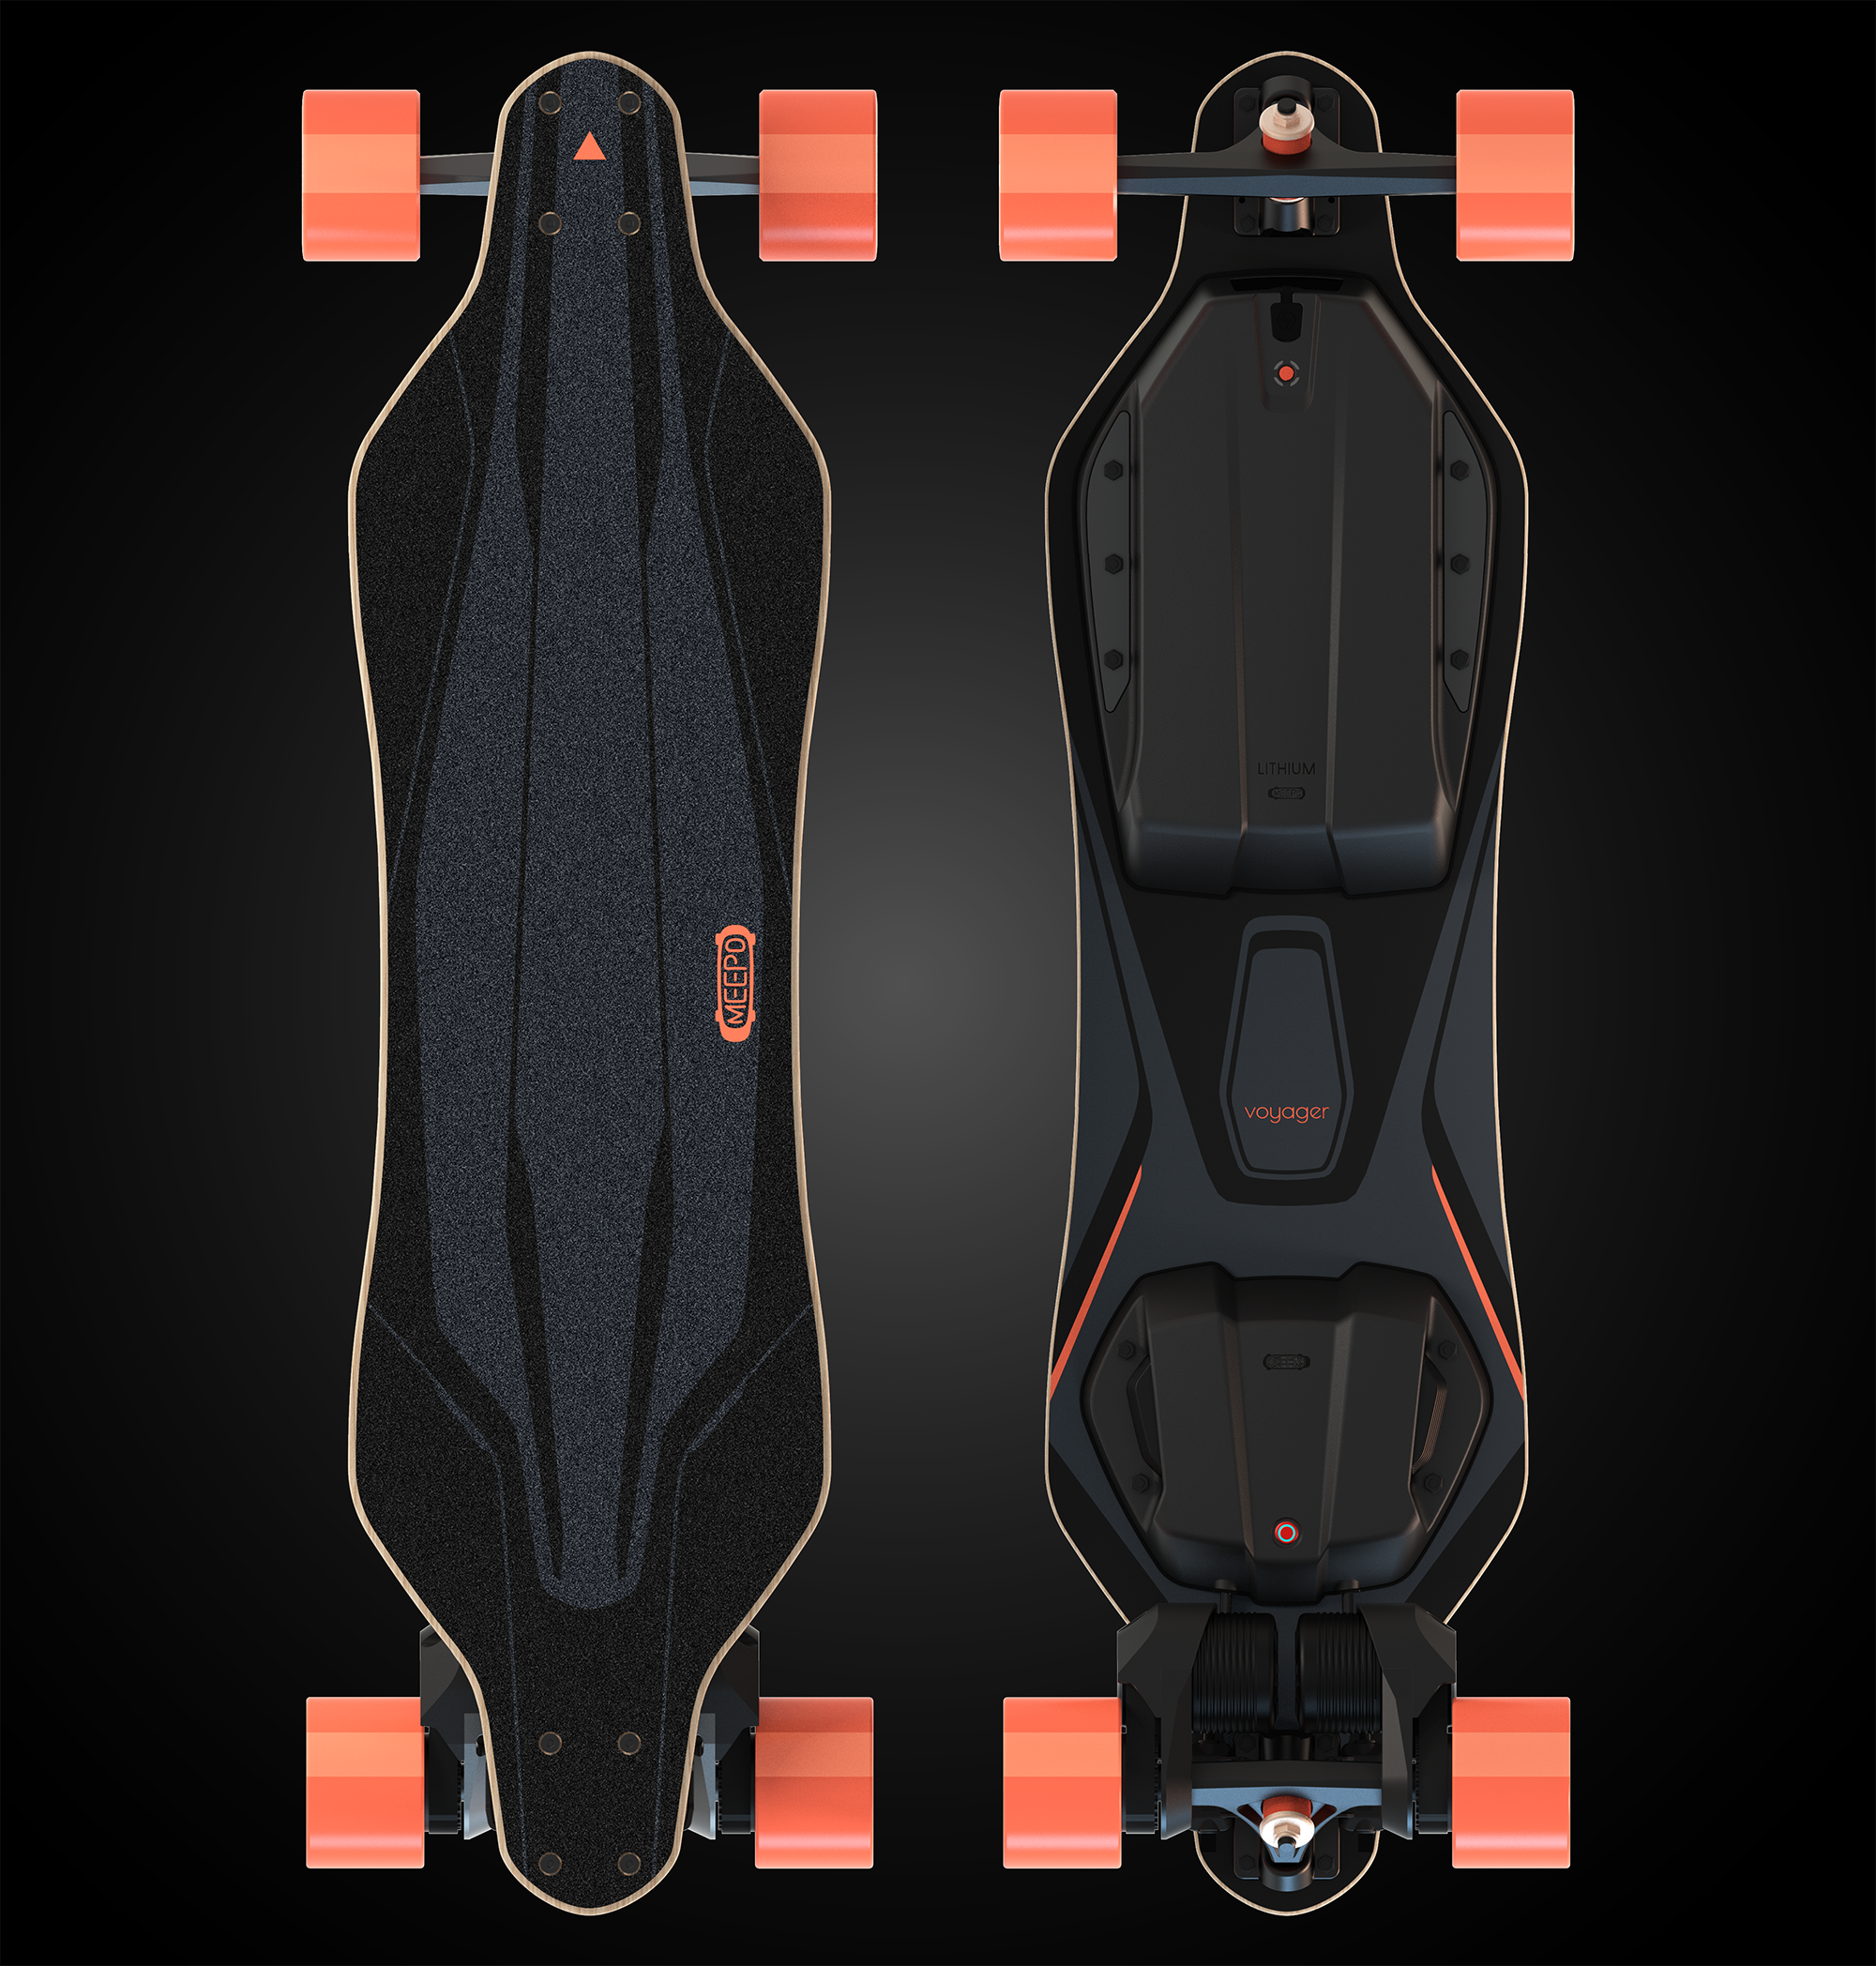 Upcoming Meepo Products June 2022: A Complete Guide